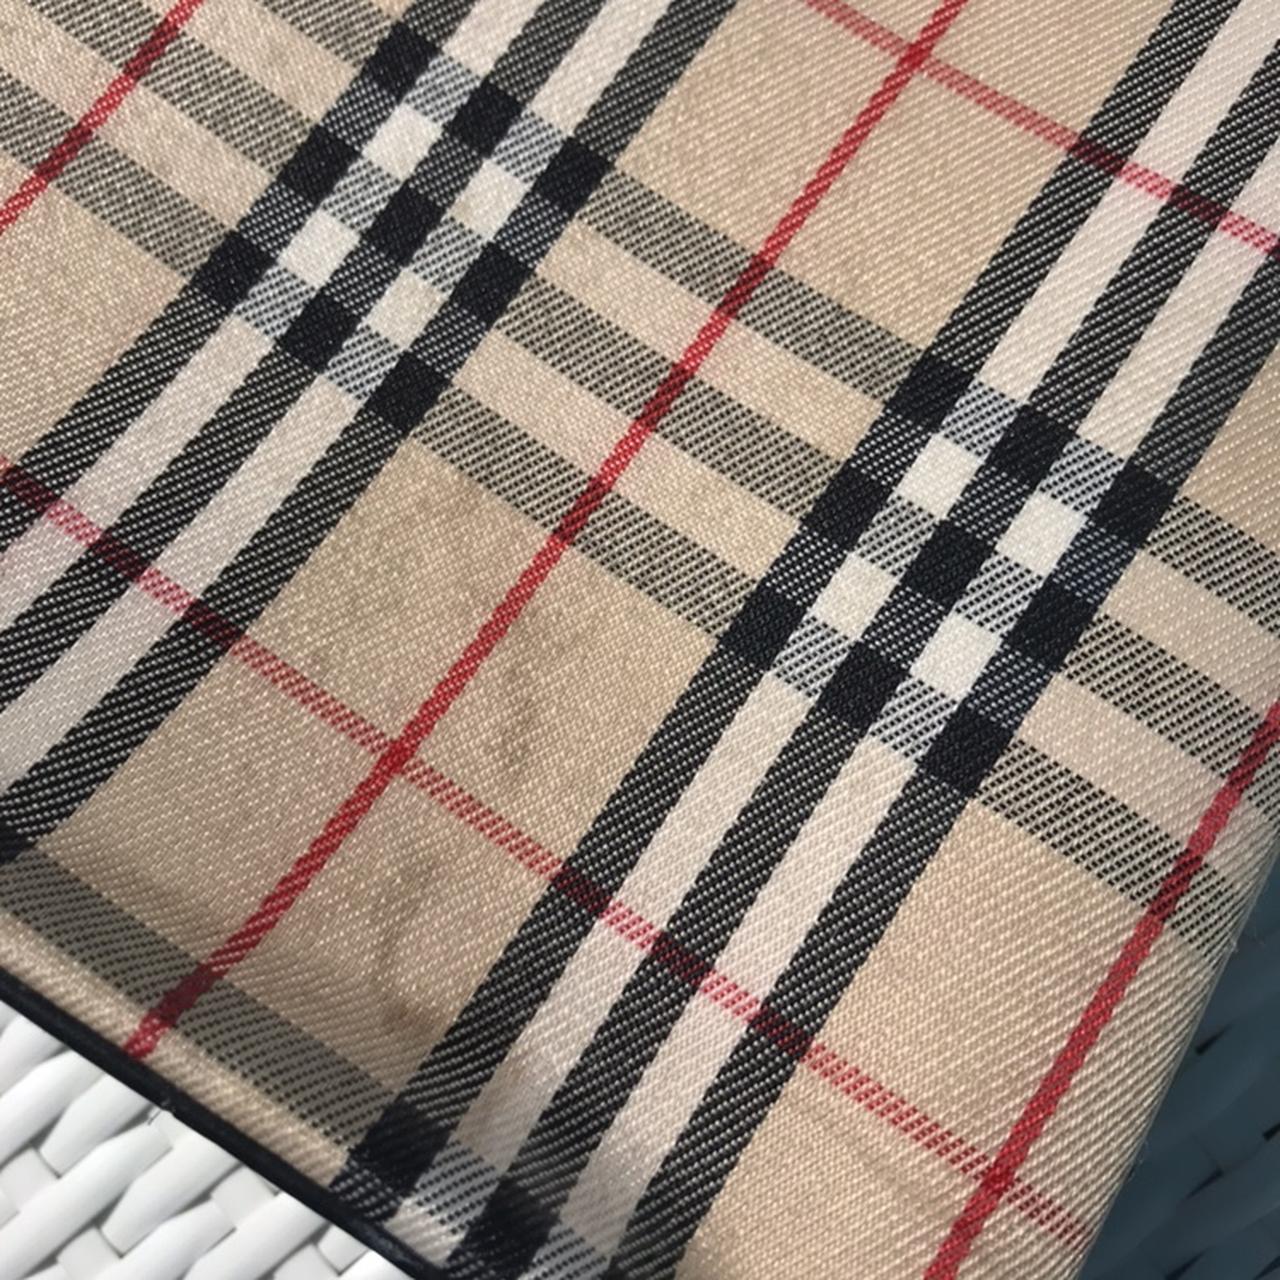 Authentic Burberry Purse has some little stain shown - Depop